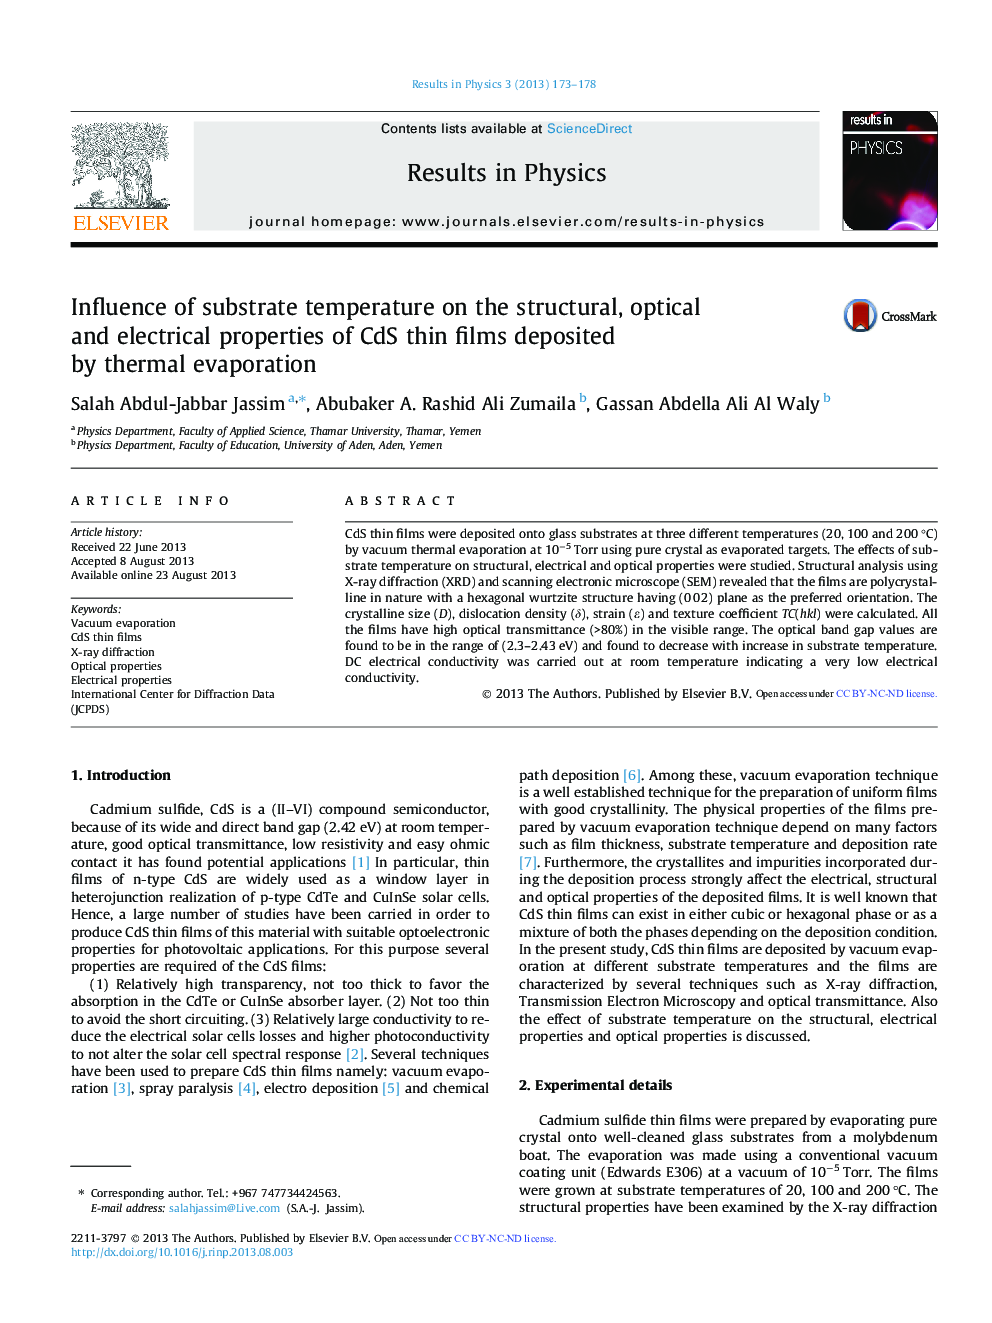 Influence of substrate temperature on the structural, optical and electrical properties of CdS thin films deposited by thermal evaporation